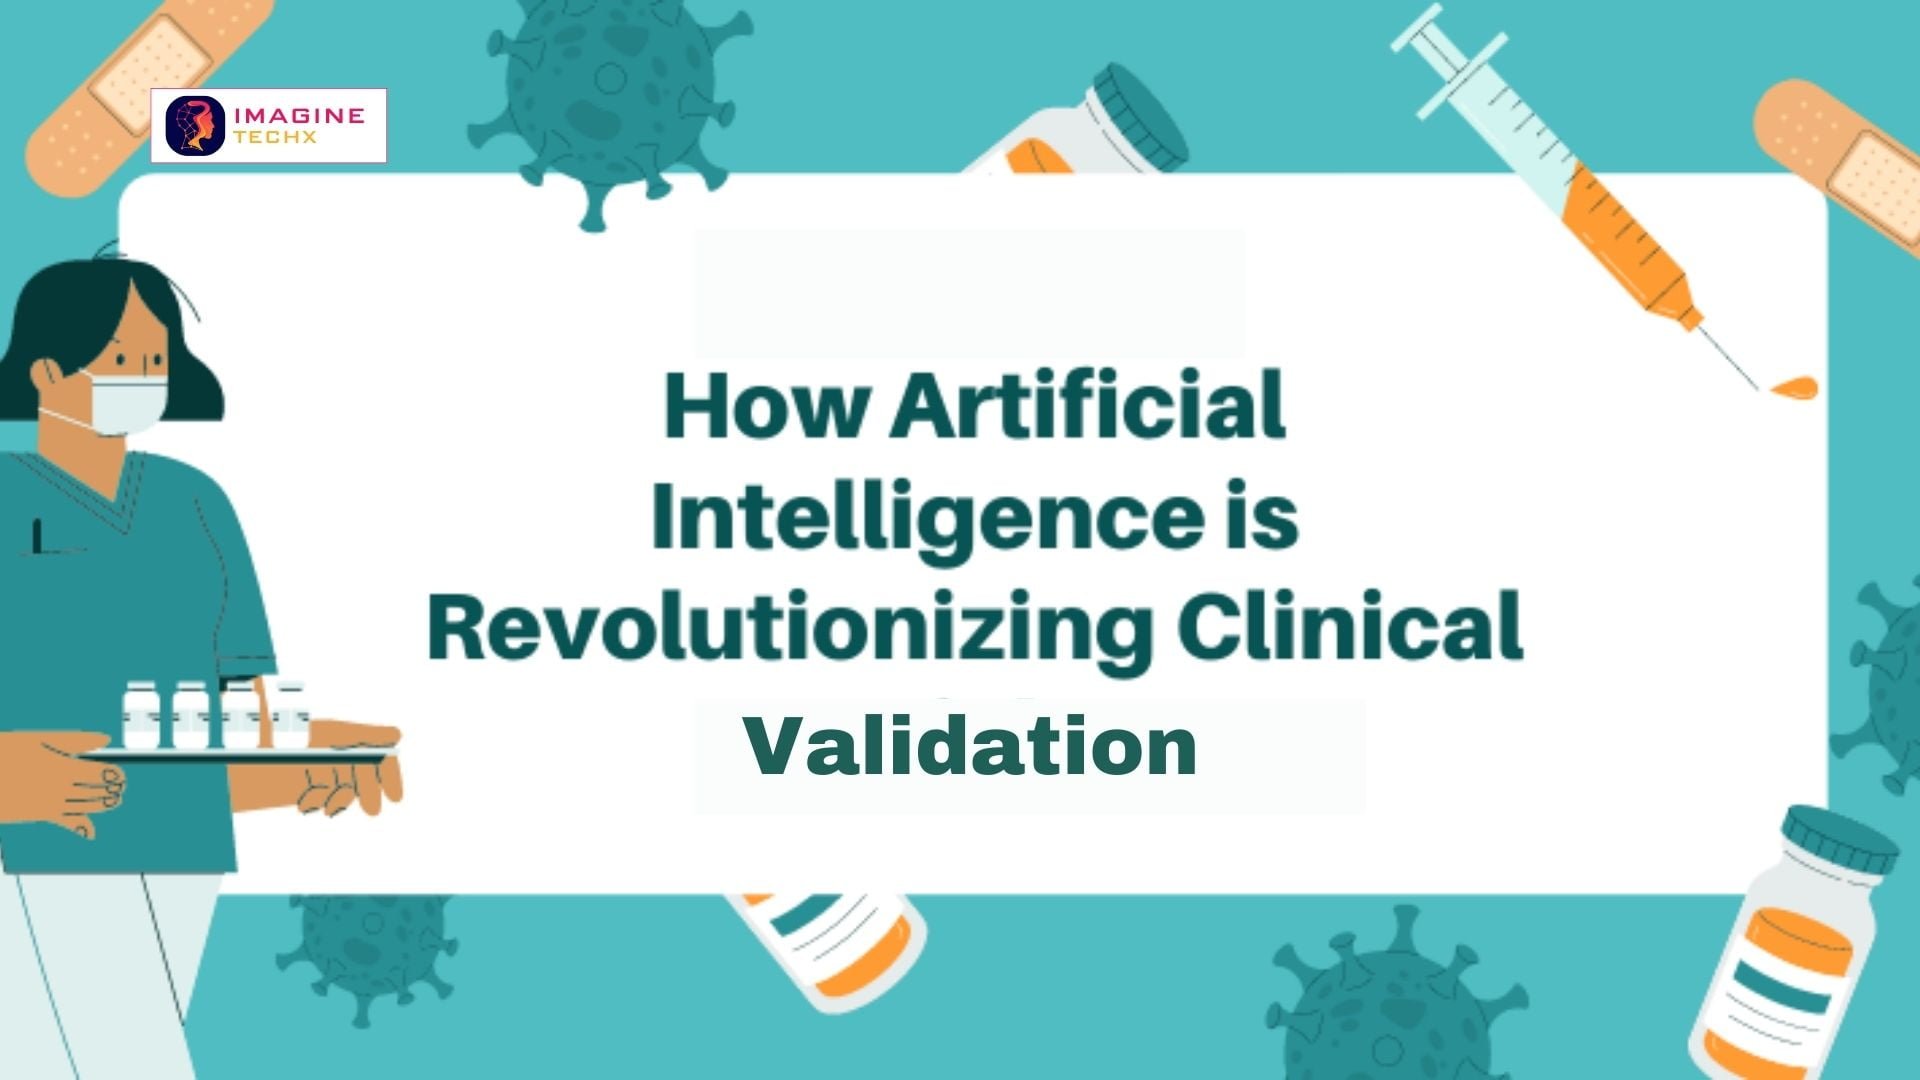 How Artificial Intelligence is Revolutionizing Clinical Validation